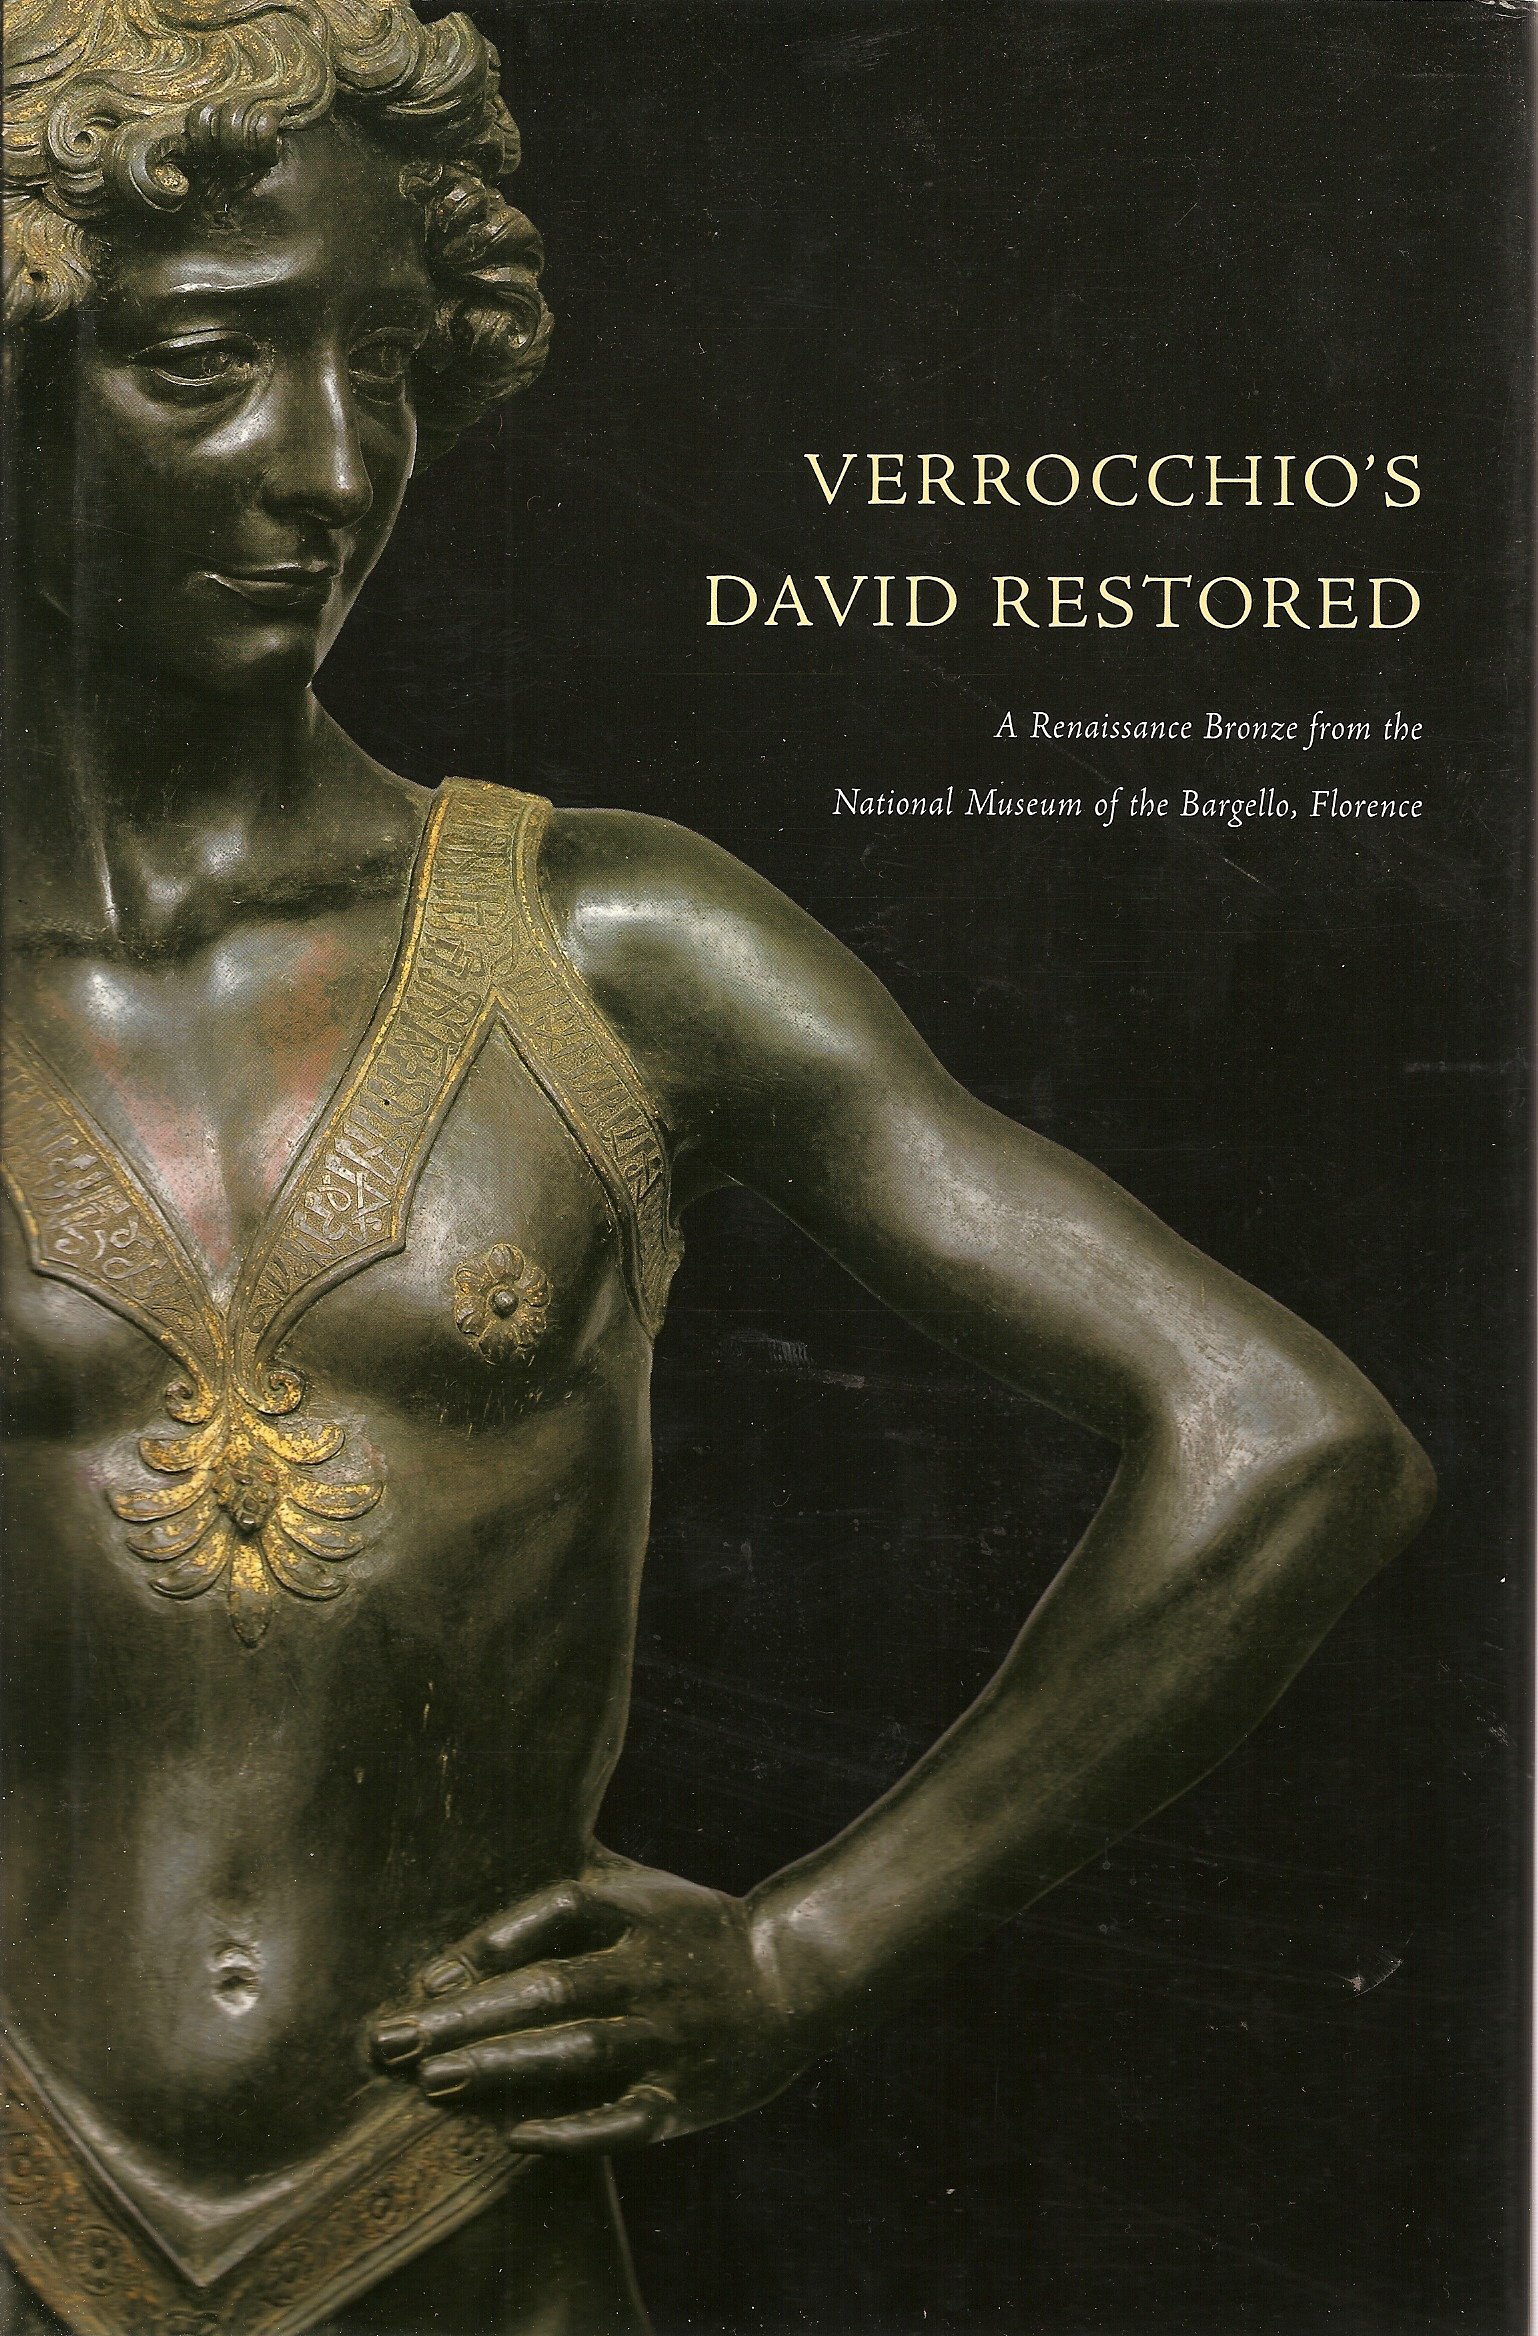 Verrocchio's David Restored: A Renaissance Bronze from the National Museum of the Bargello, Florence